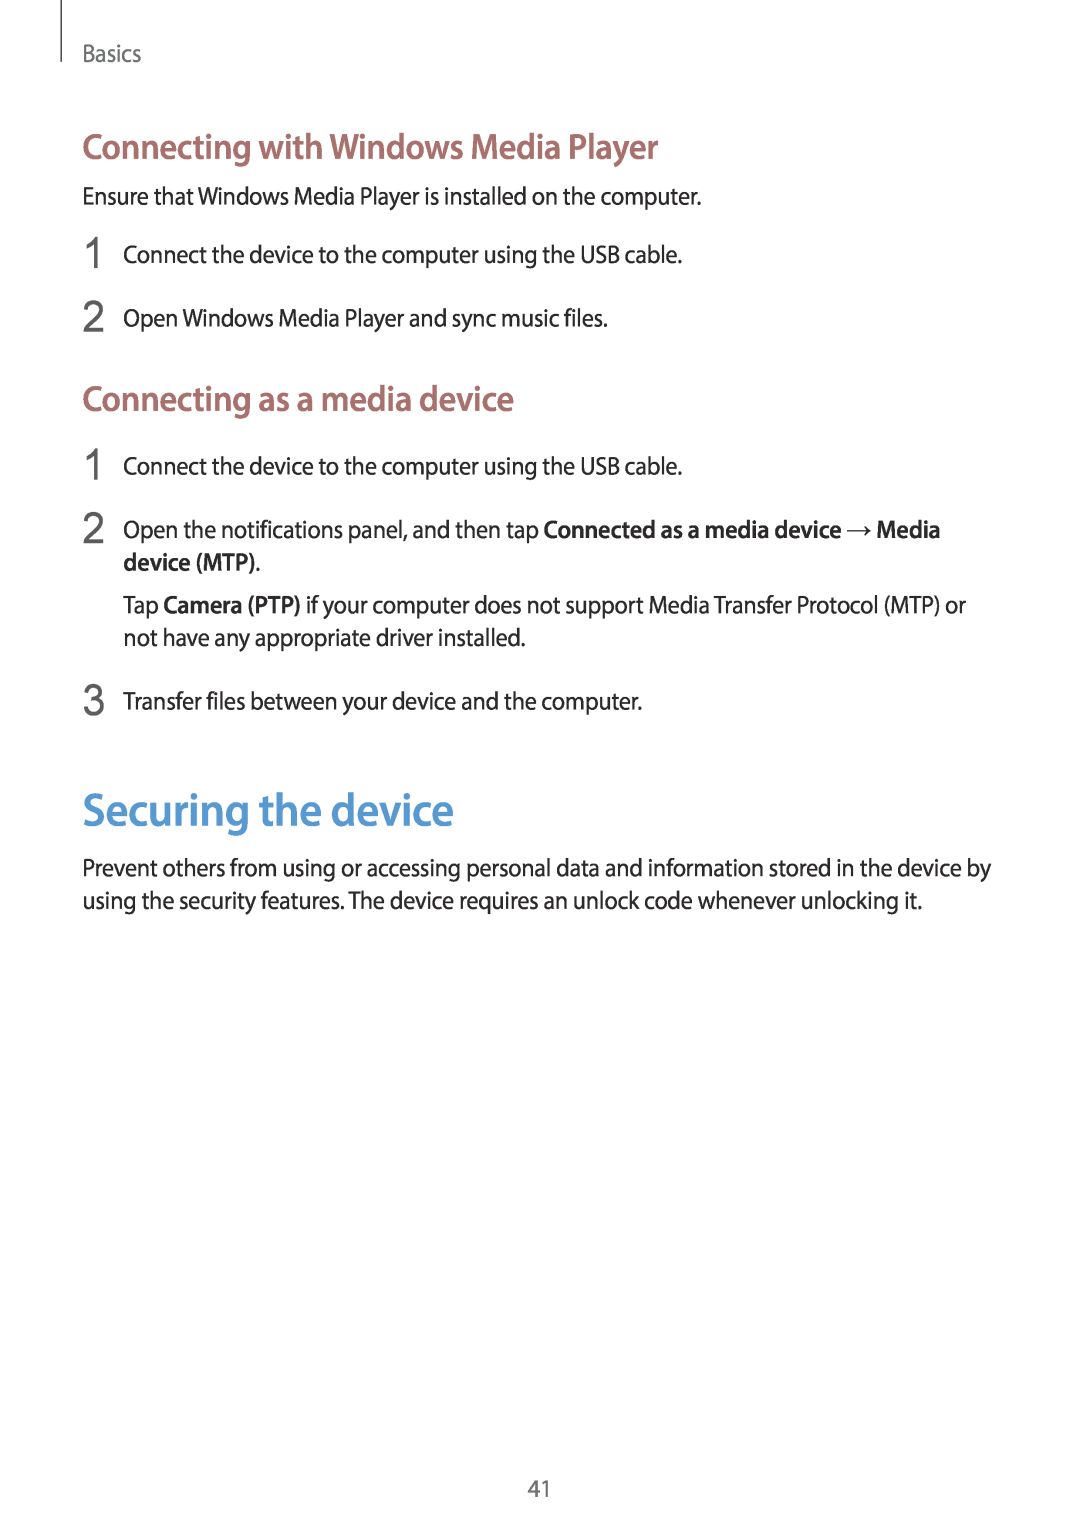 Samsung SM-G7105ZKACEL Securing the device, Connecting with Windows Media Player, Connecting as a media device, device MTP 